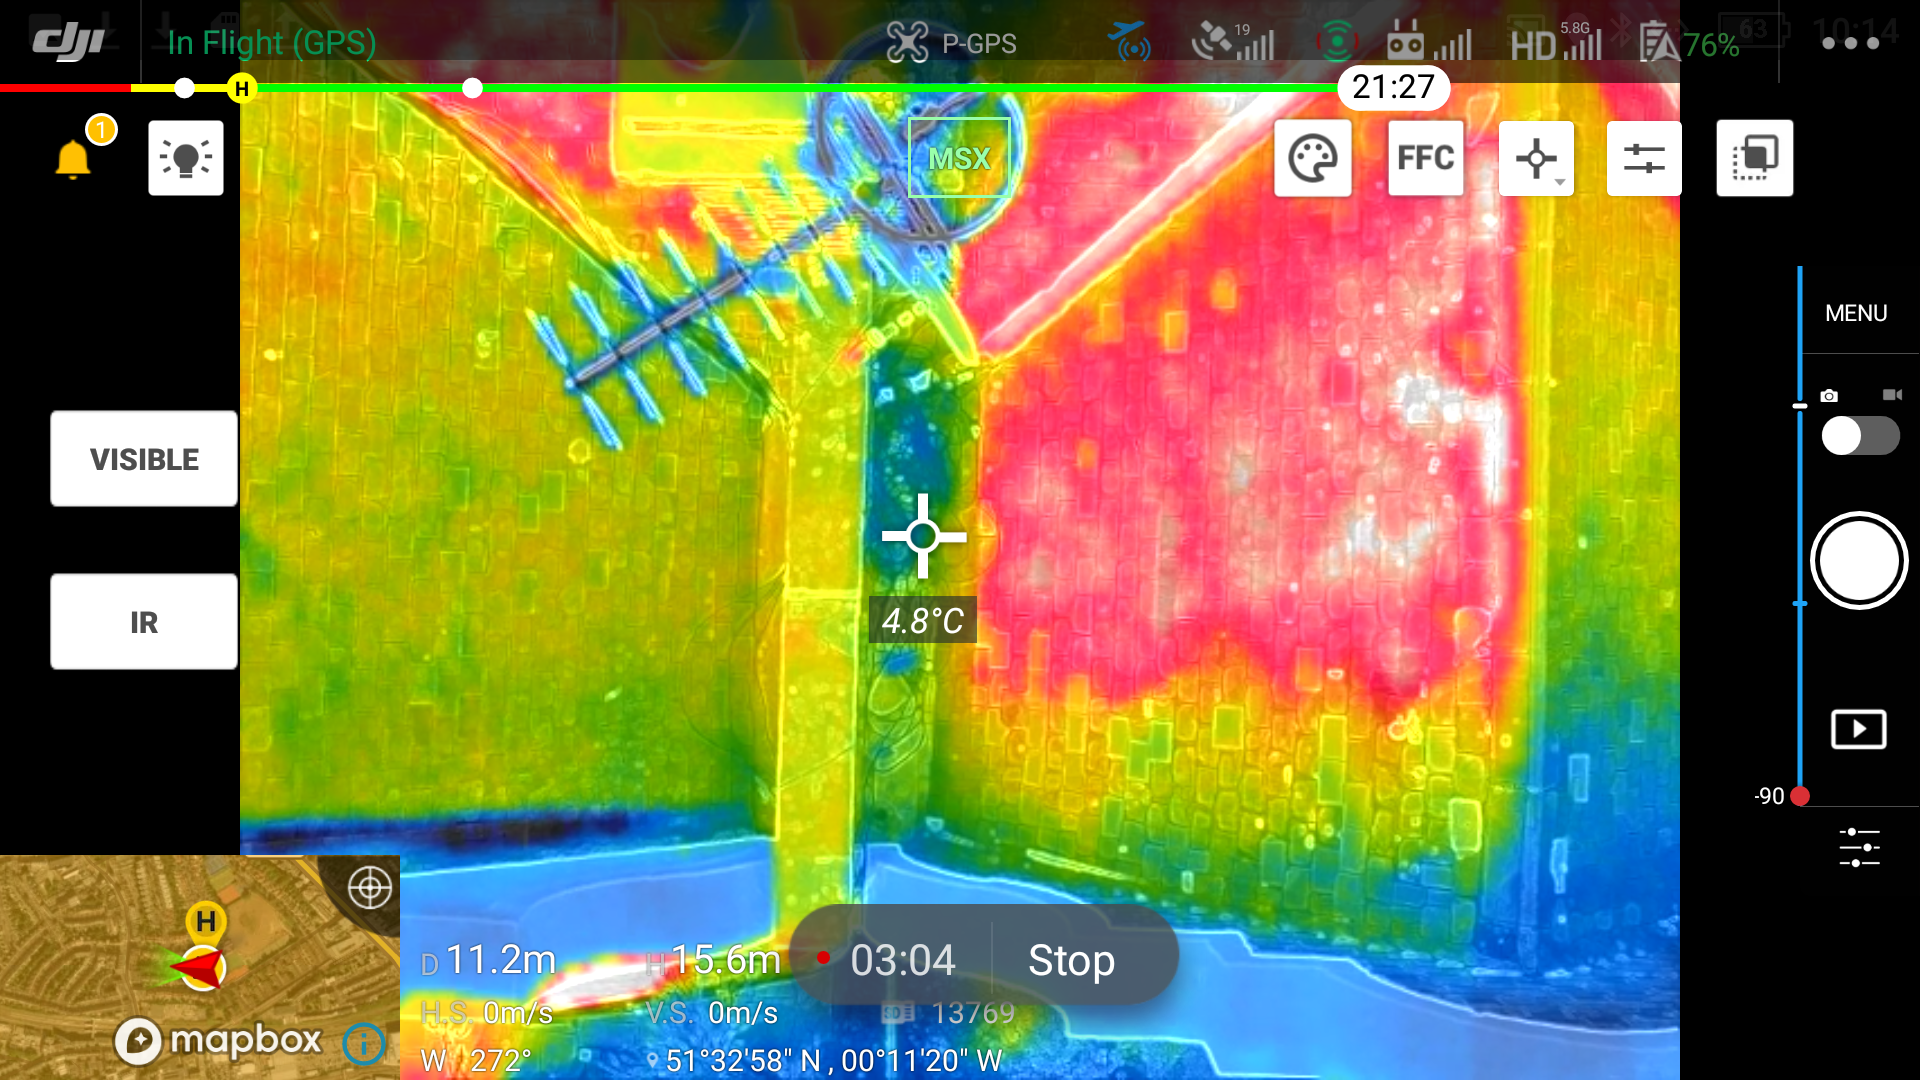 Drone used to capture thermal image and assess roof leak issue